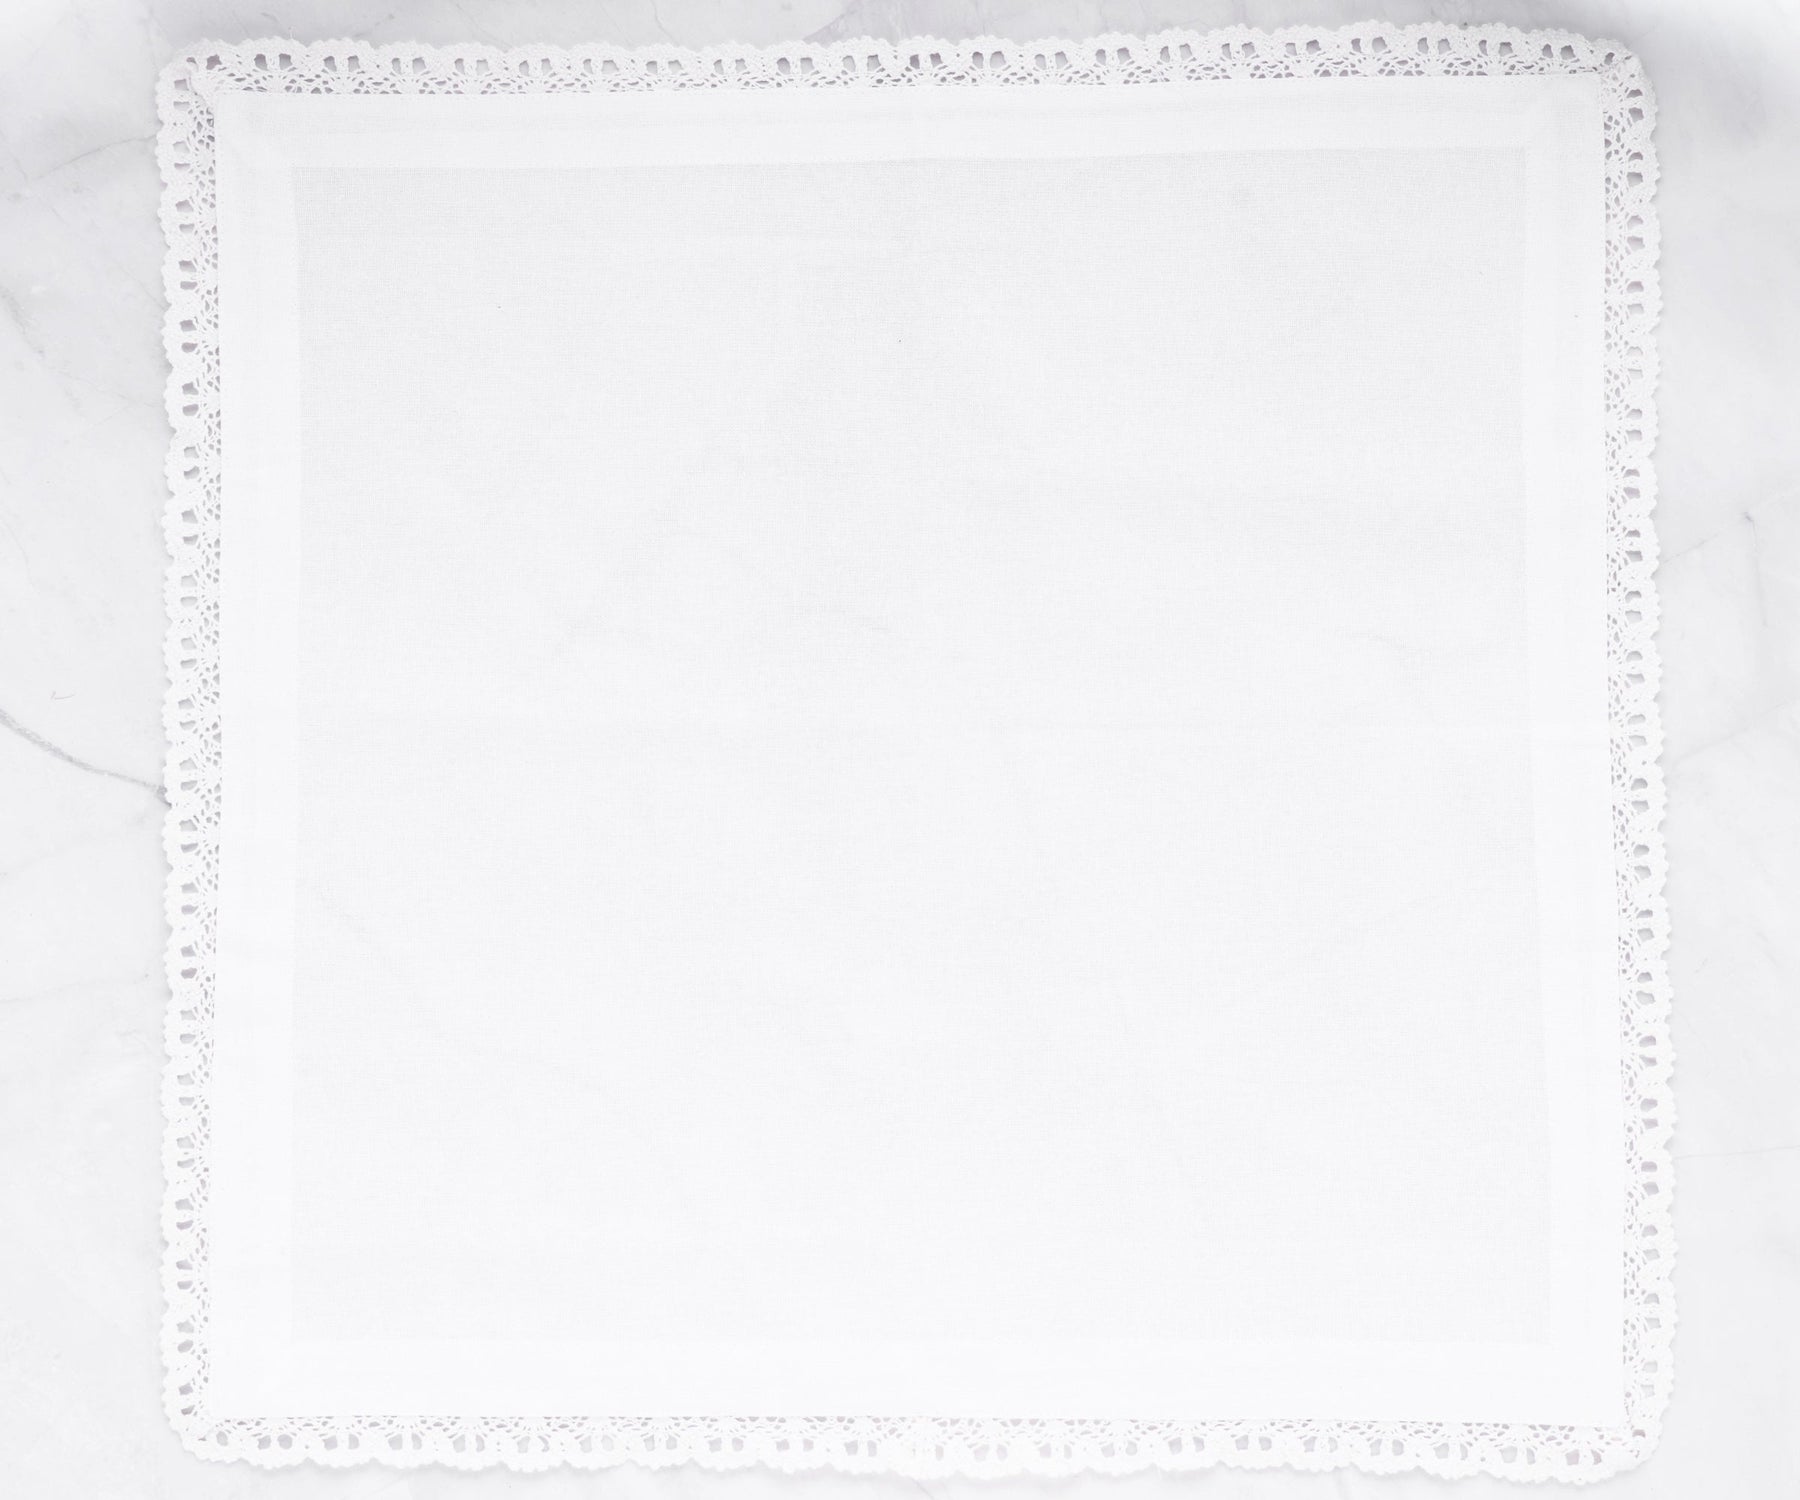 Cloth napkins set of 6, a convenient bundle for hosting, ensures you have ample options for guests at your dining table.